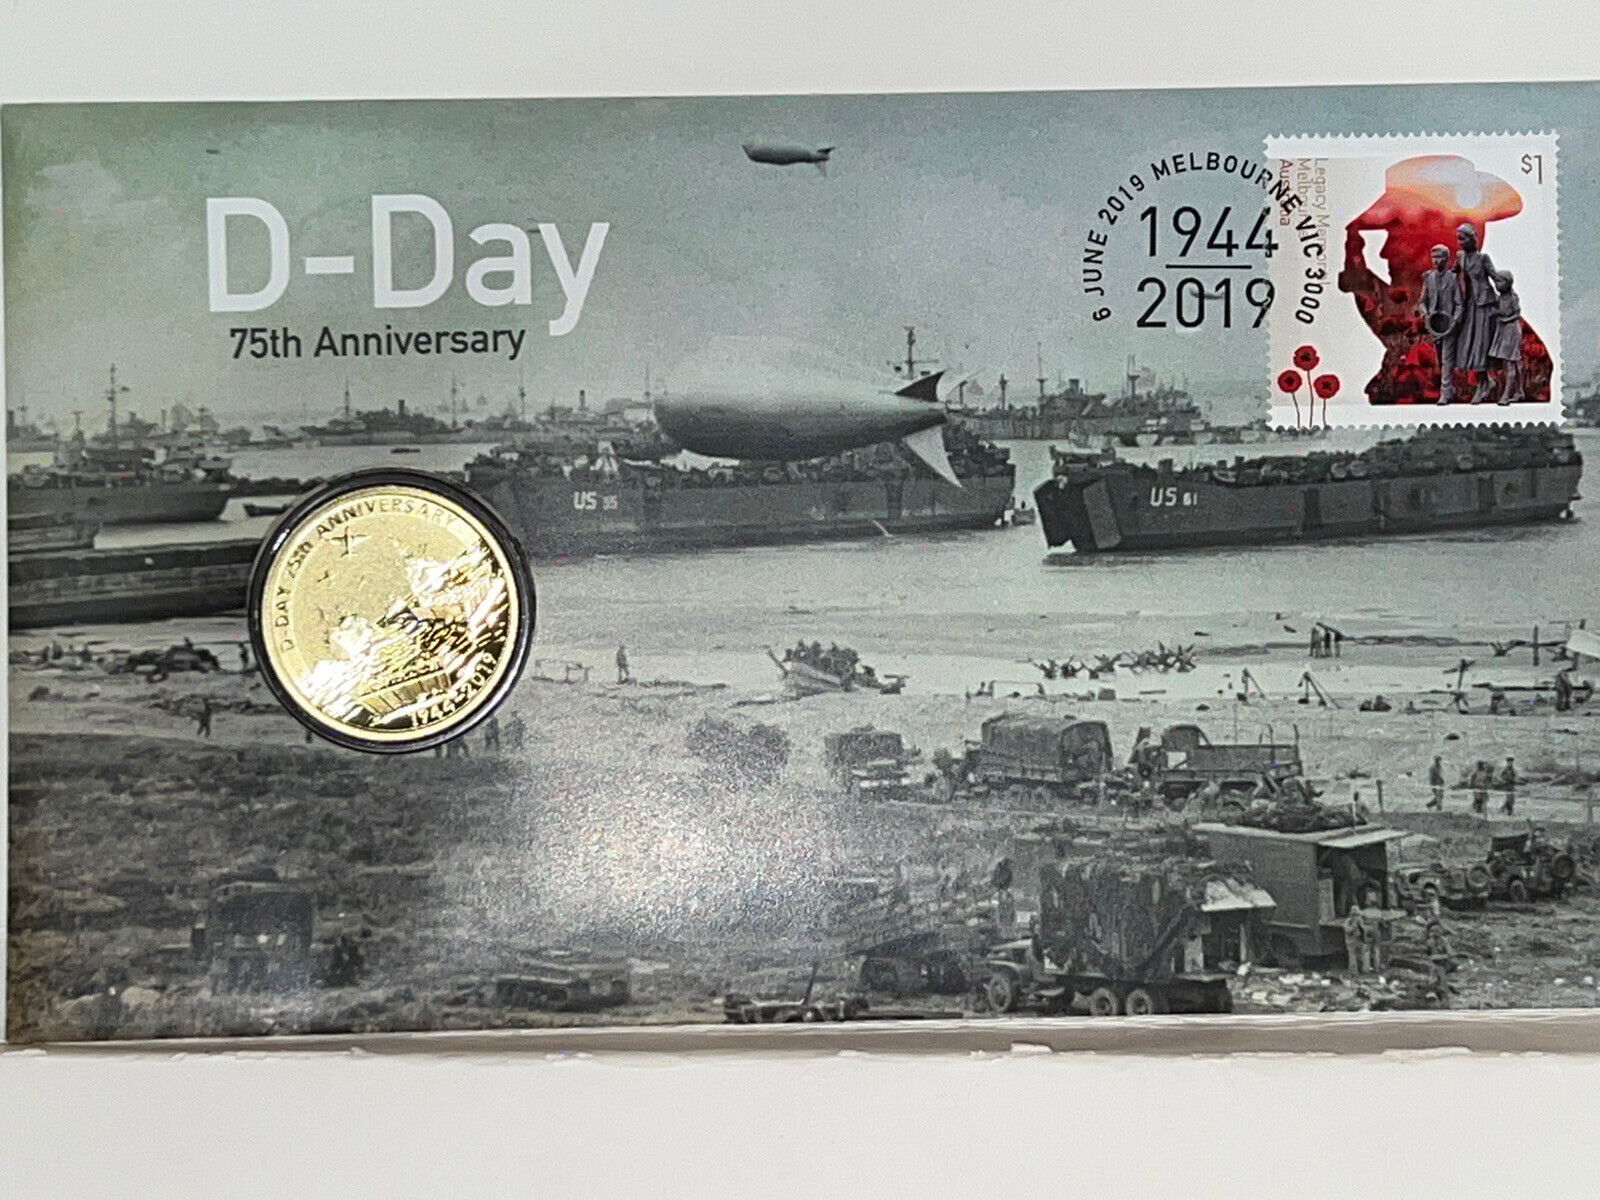 2019 COIN, ENVELOPE, STAMP, AND POST MARK ON 6-6-19. 75th ANNIVERSARY OF D-DAY. 